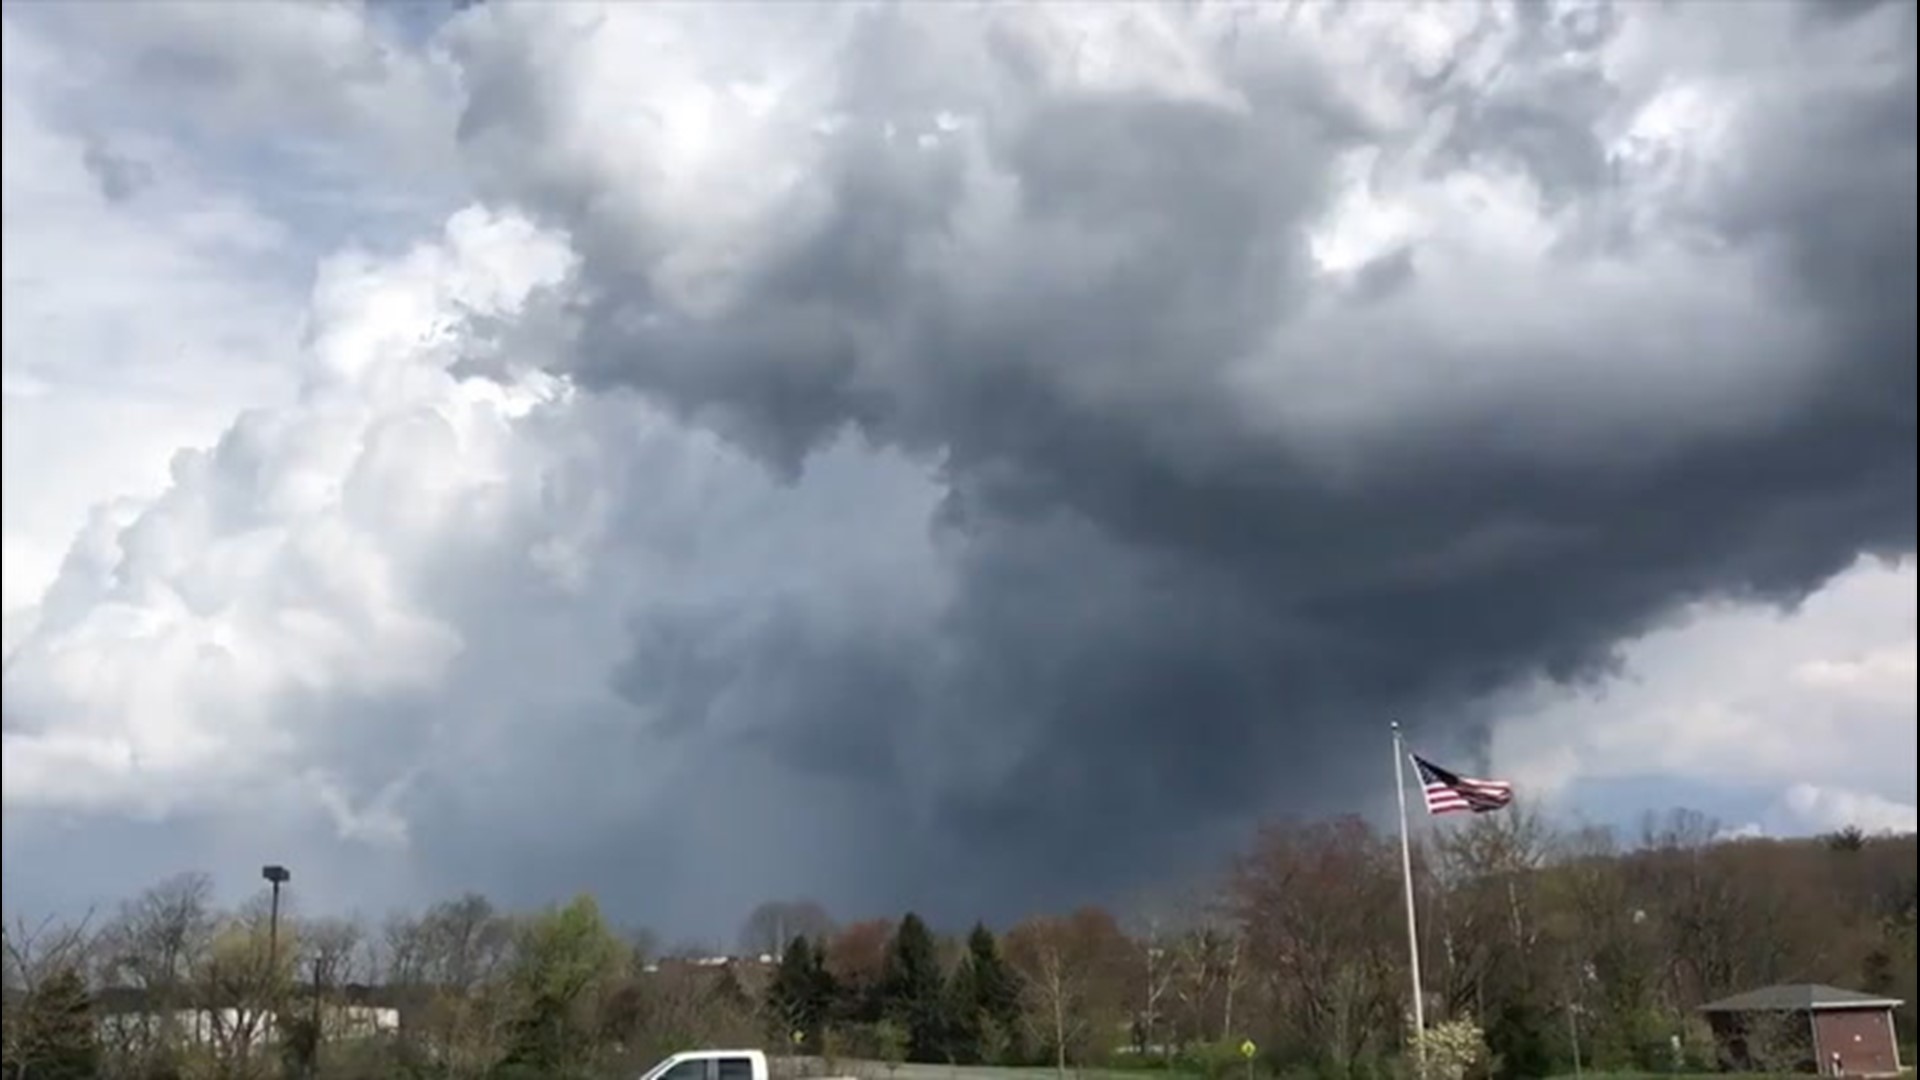 On Wednesday, April 8, tornado sirens sounded off on the Virginia Tech campus in Blacksburg, Virginia.